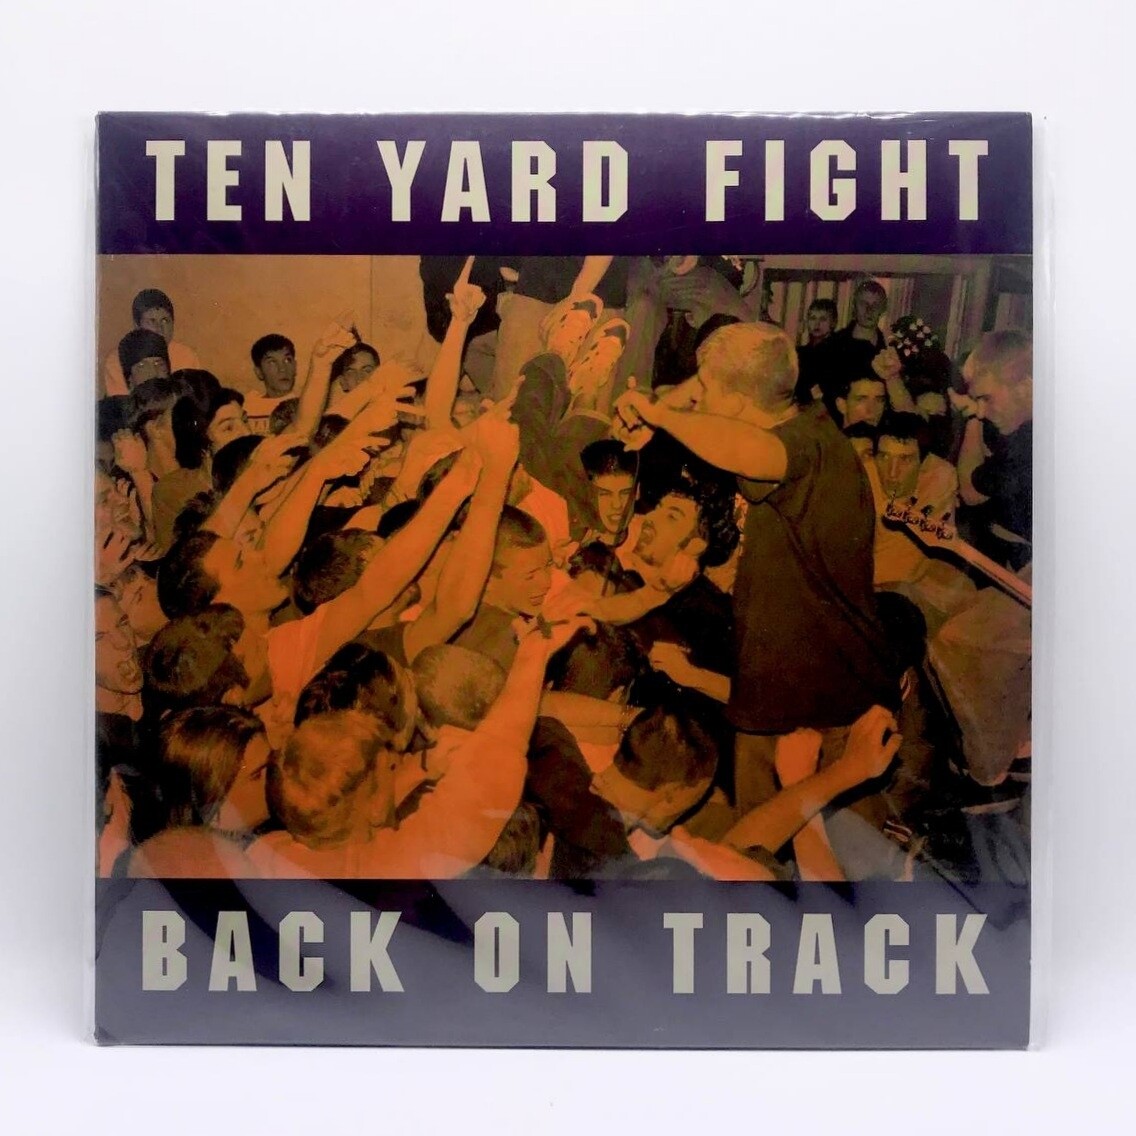 [USED] TEN YARD FIGHT -BACK ON TRACK- LP